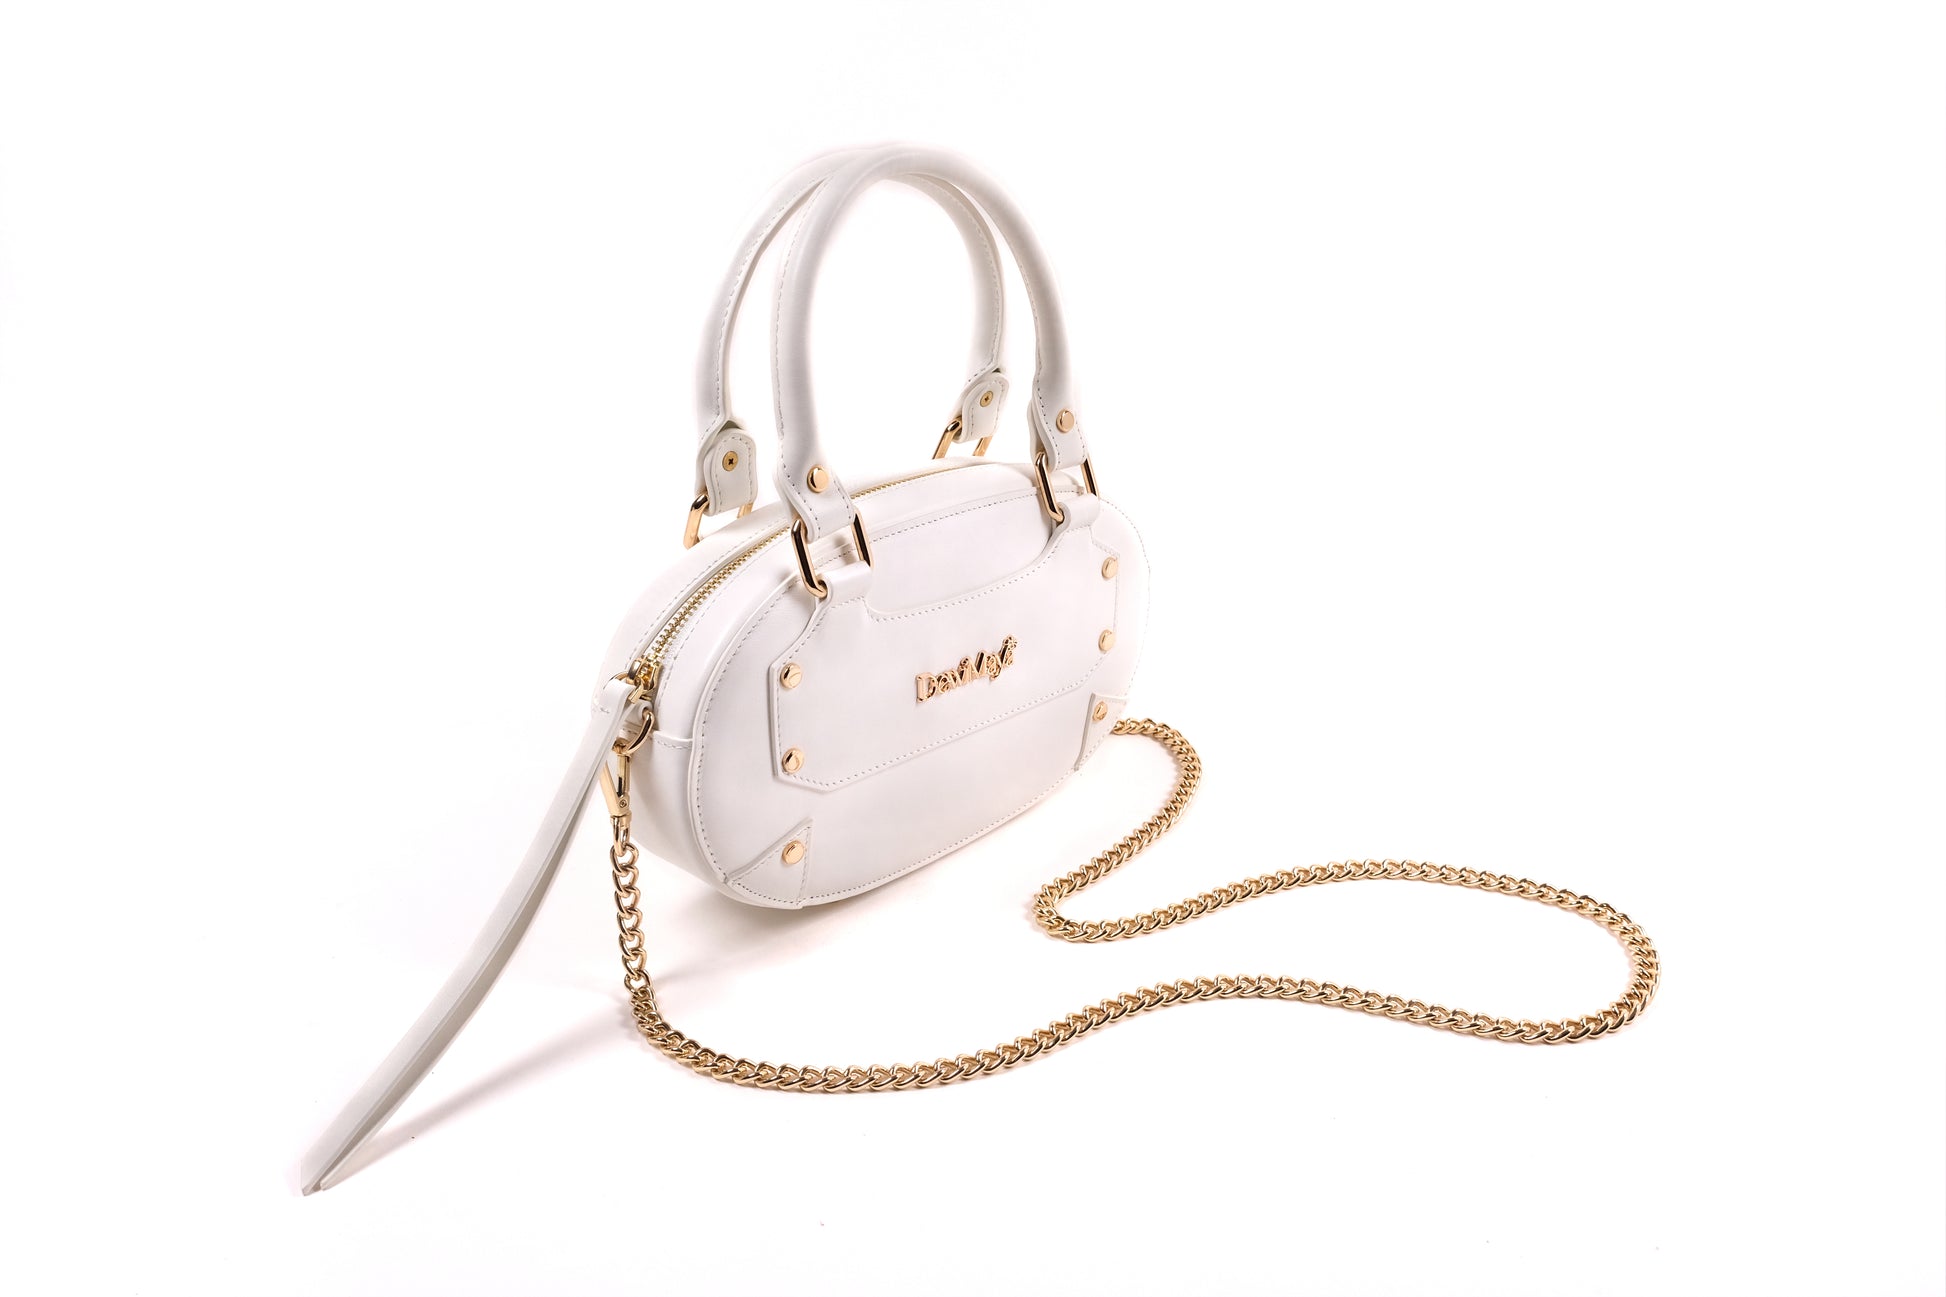 Jasmine White Leather Handbag Made by Dewi Maya front view with gold shoulder strap chain available at the best boutique in Upstate South Carolina Spartanburg Greenville Dewi Maya Boutique